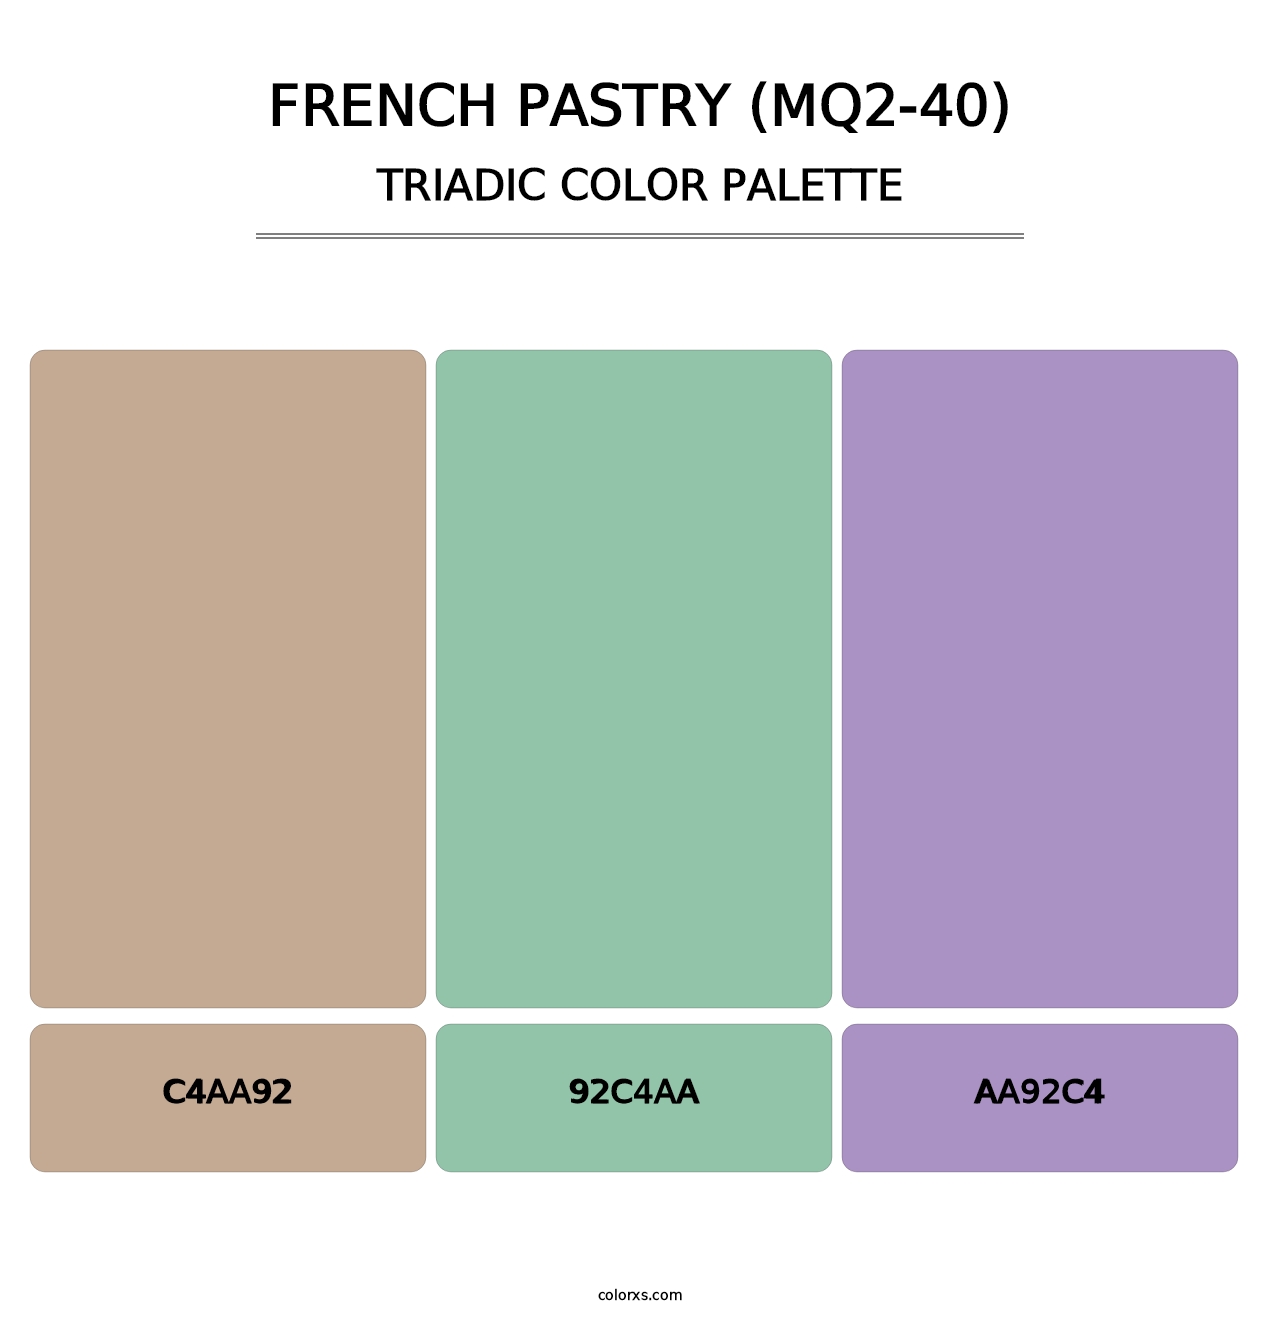 French Pastry (MQ2-40) - Triadic Color Palette